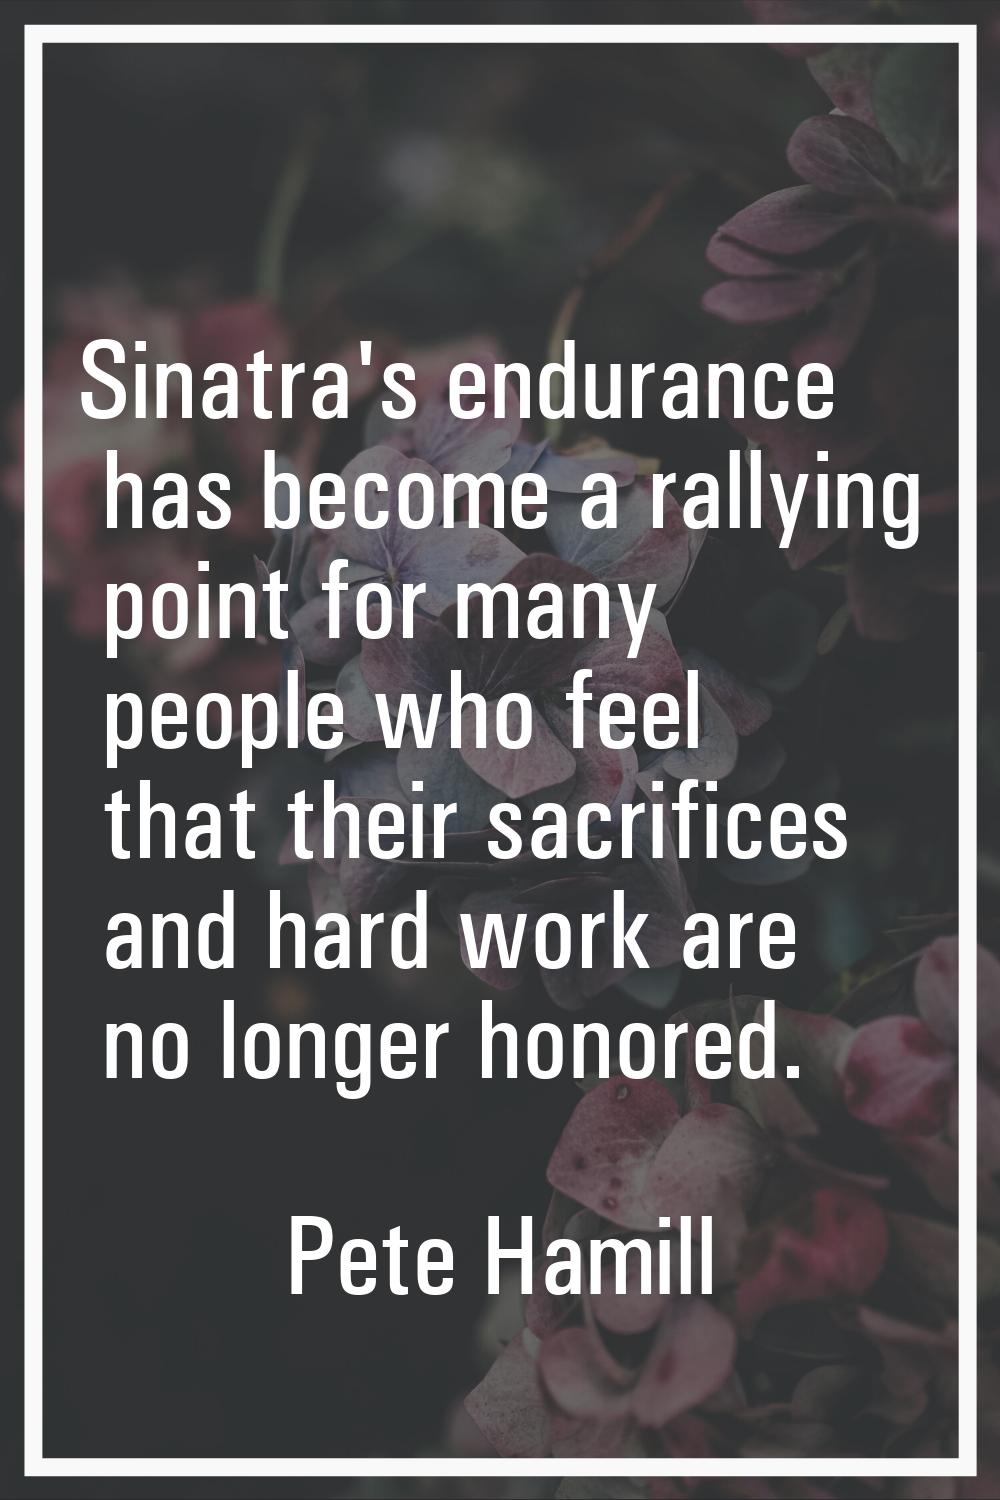 Sinatra's endurance has become a rallying point for many people who feel that their sacrifices and 